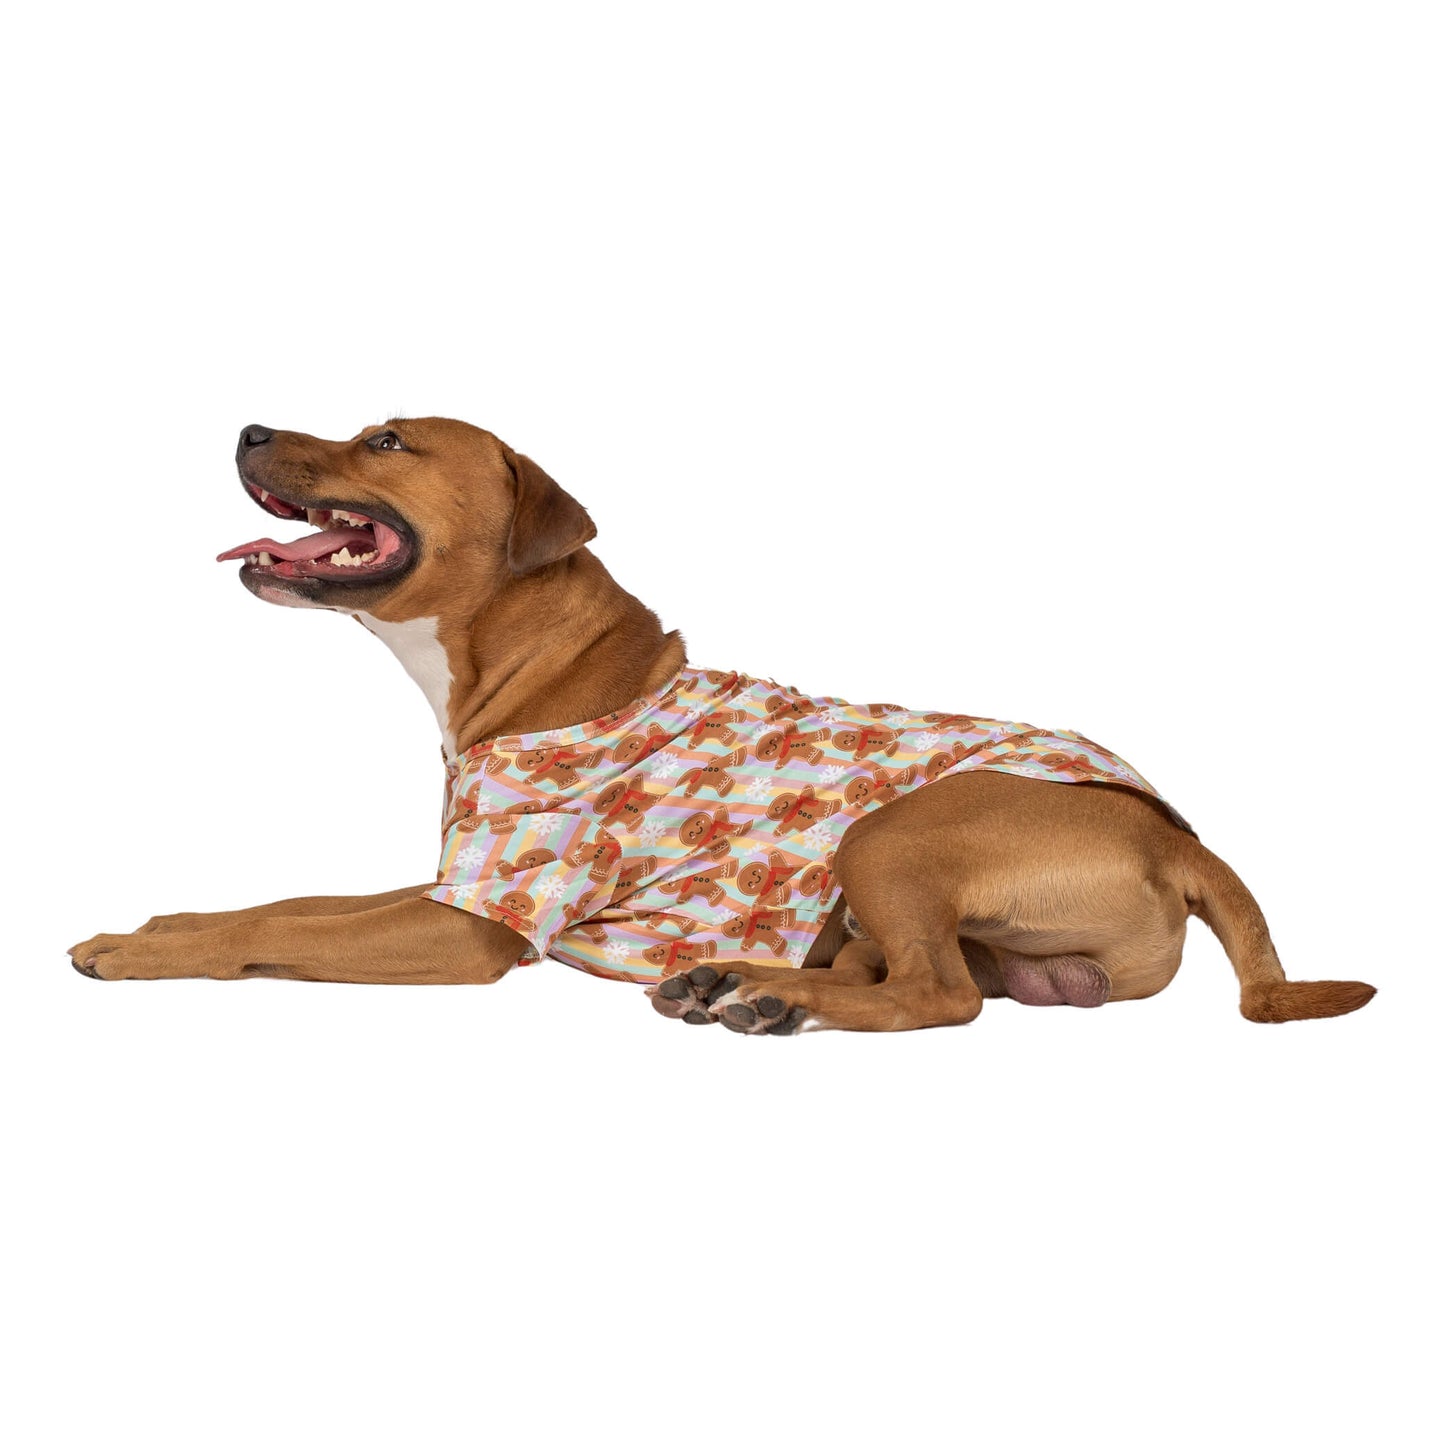 Arlo the Staffy laying down wearing VIbrant Hounds Gingerbread Cheer Christmas shirt for dogs. The shirt has vertical rainbow stripes with Gingerbread men printed on it. 